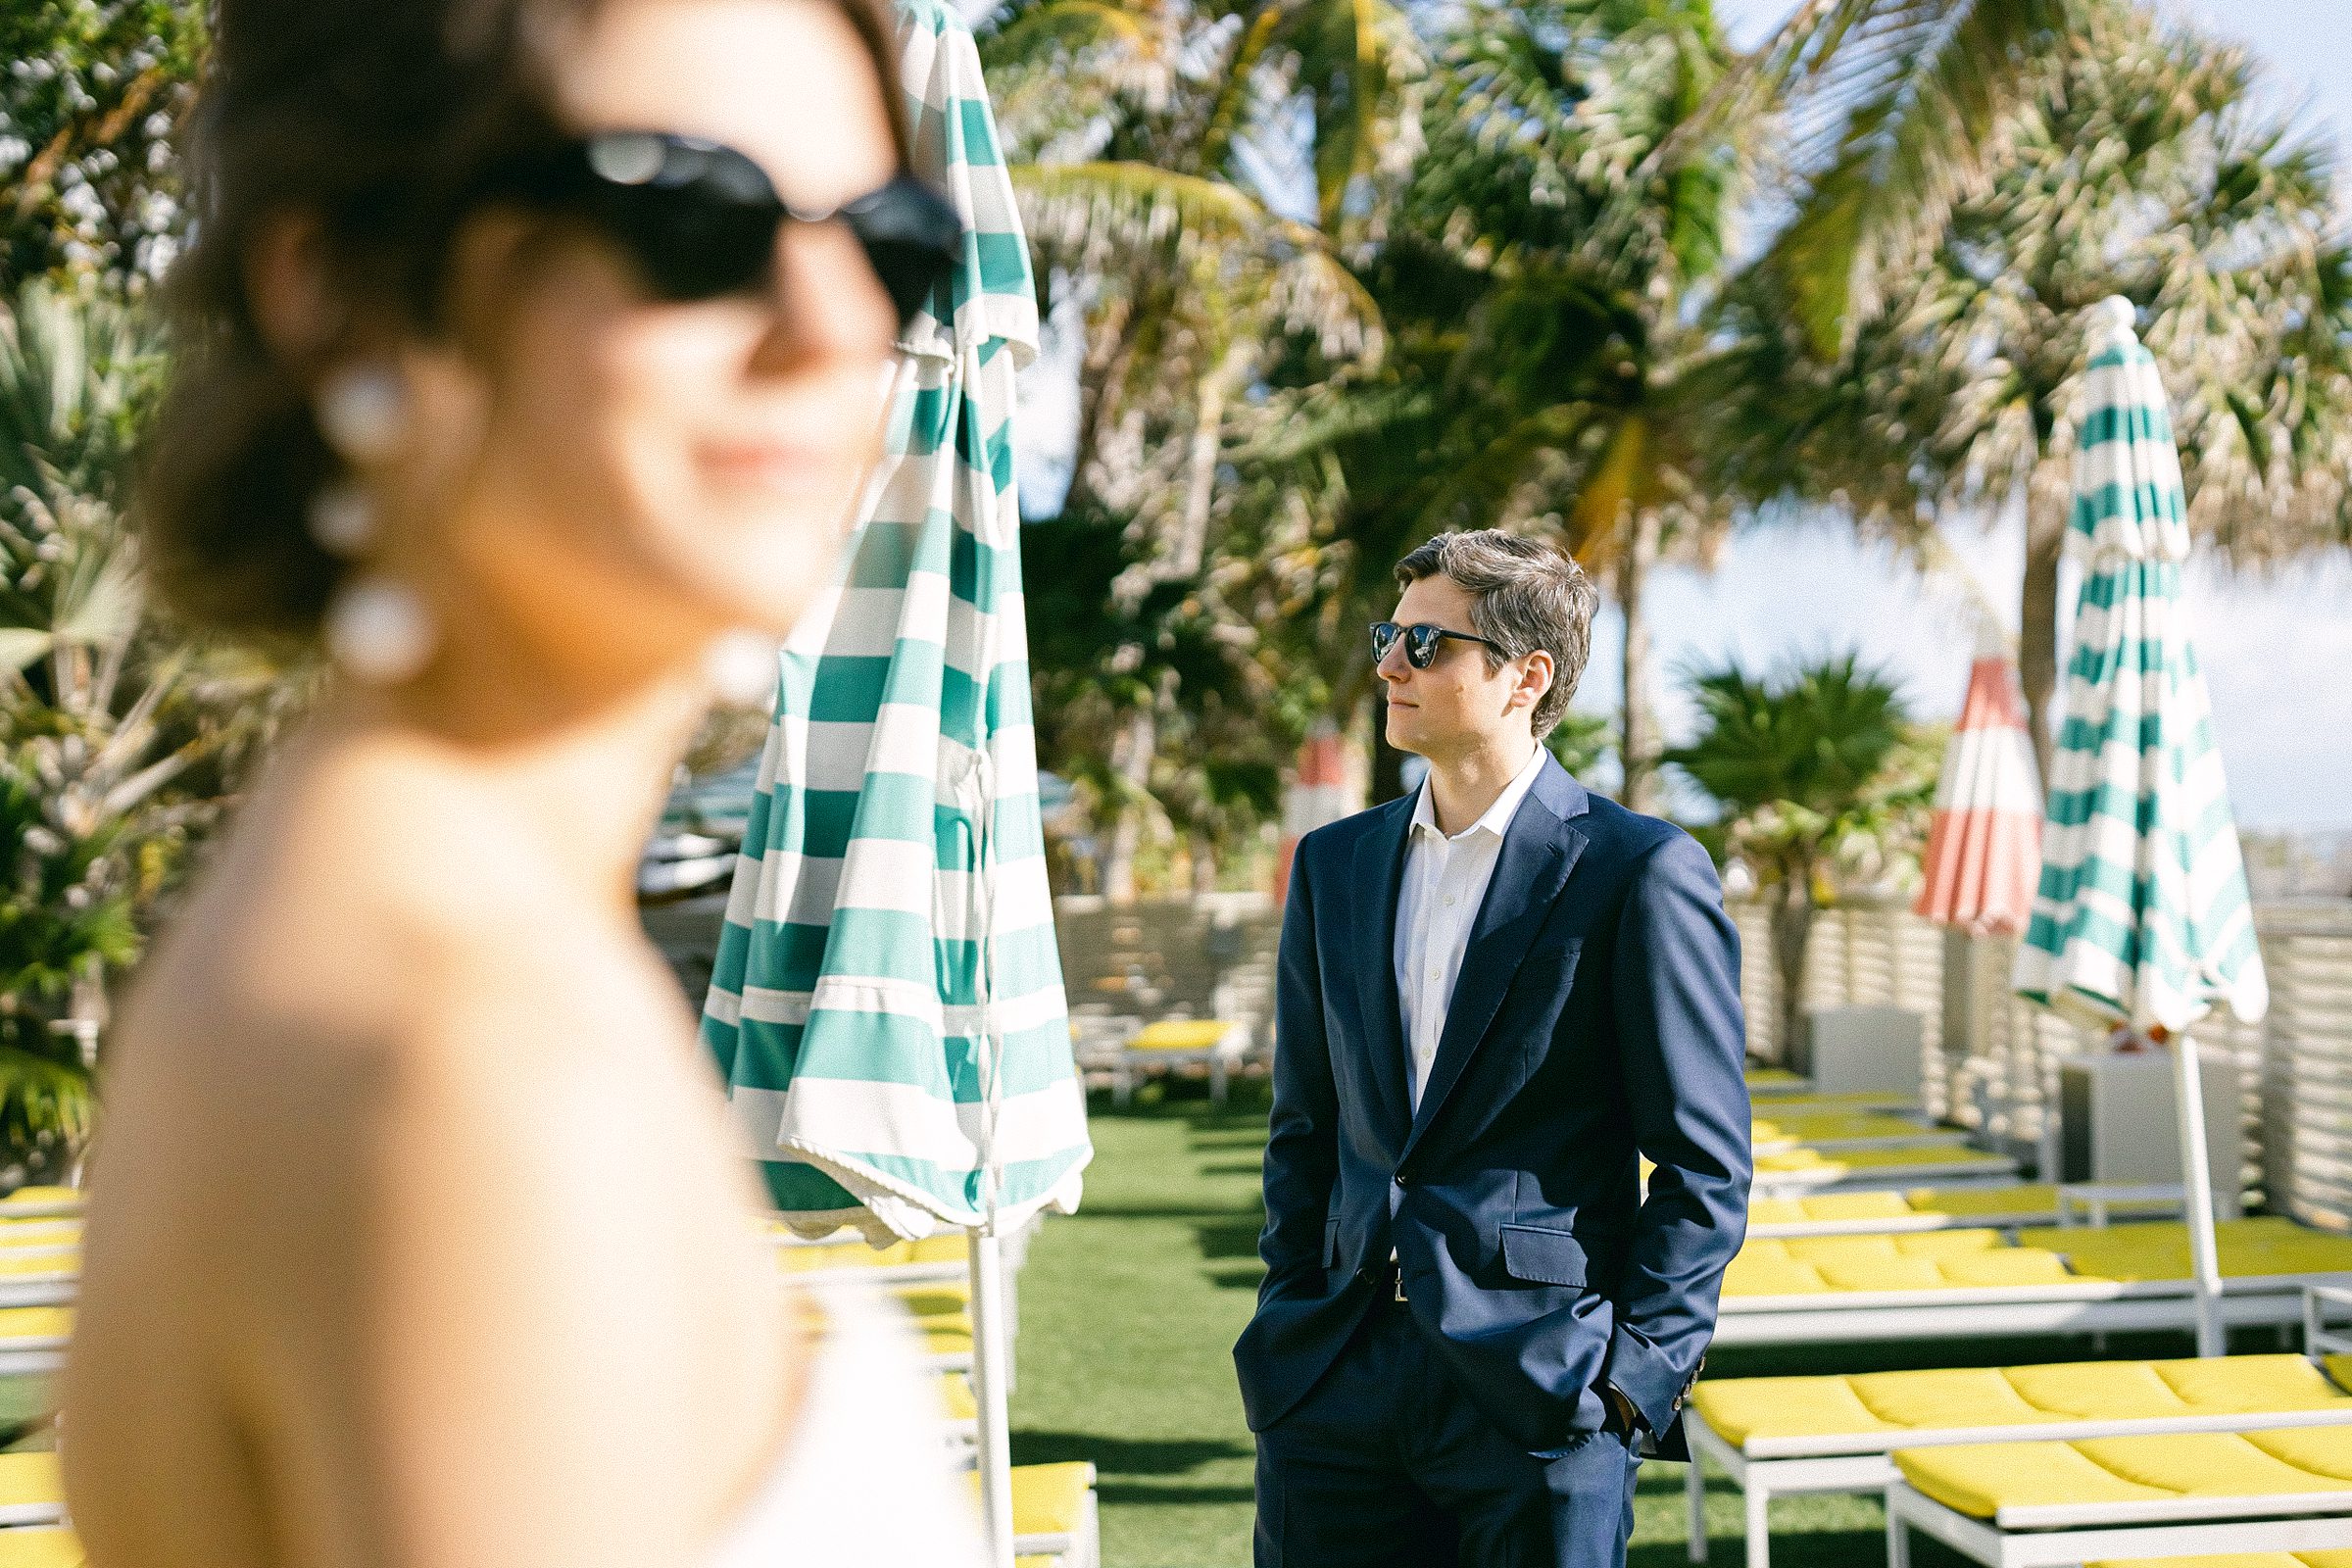 staggered editorial pose of the engaged couple. they are wearing sunglasses